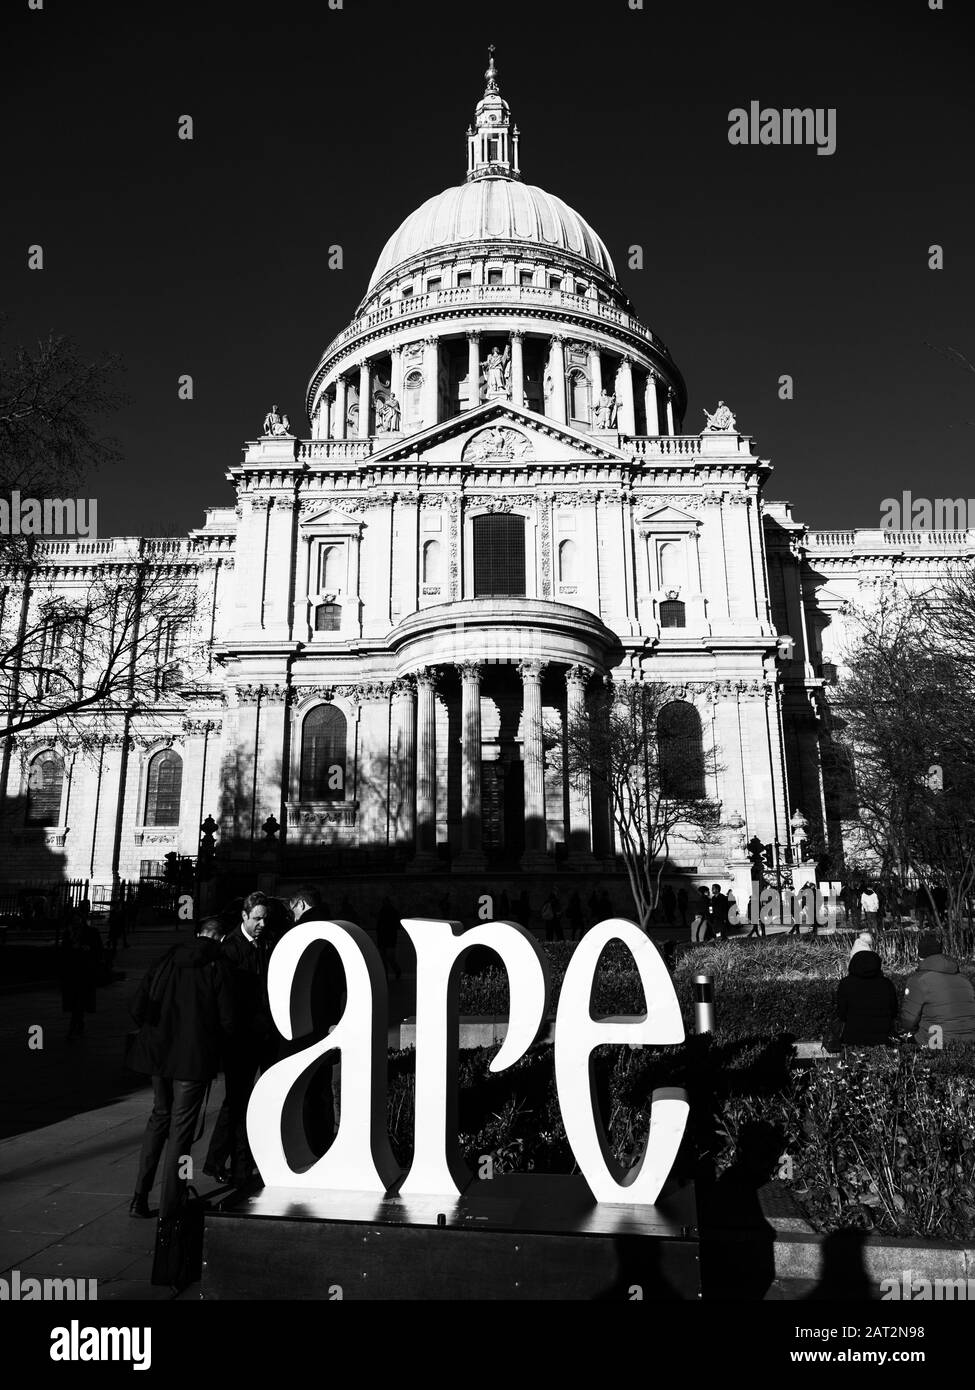 People standing next to Are, Black and White Landscape of St Pauls Cathedral, City of London, England, UK, GB. Stock Photo